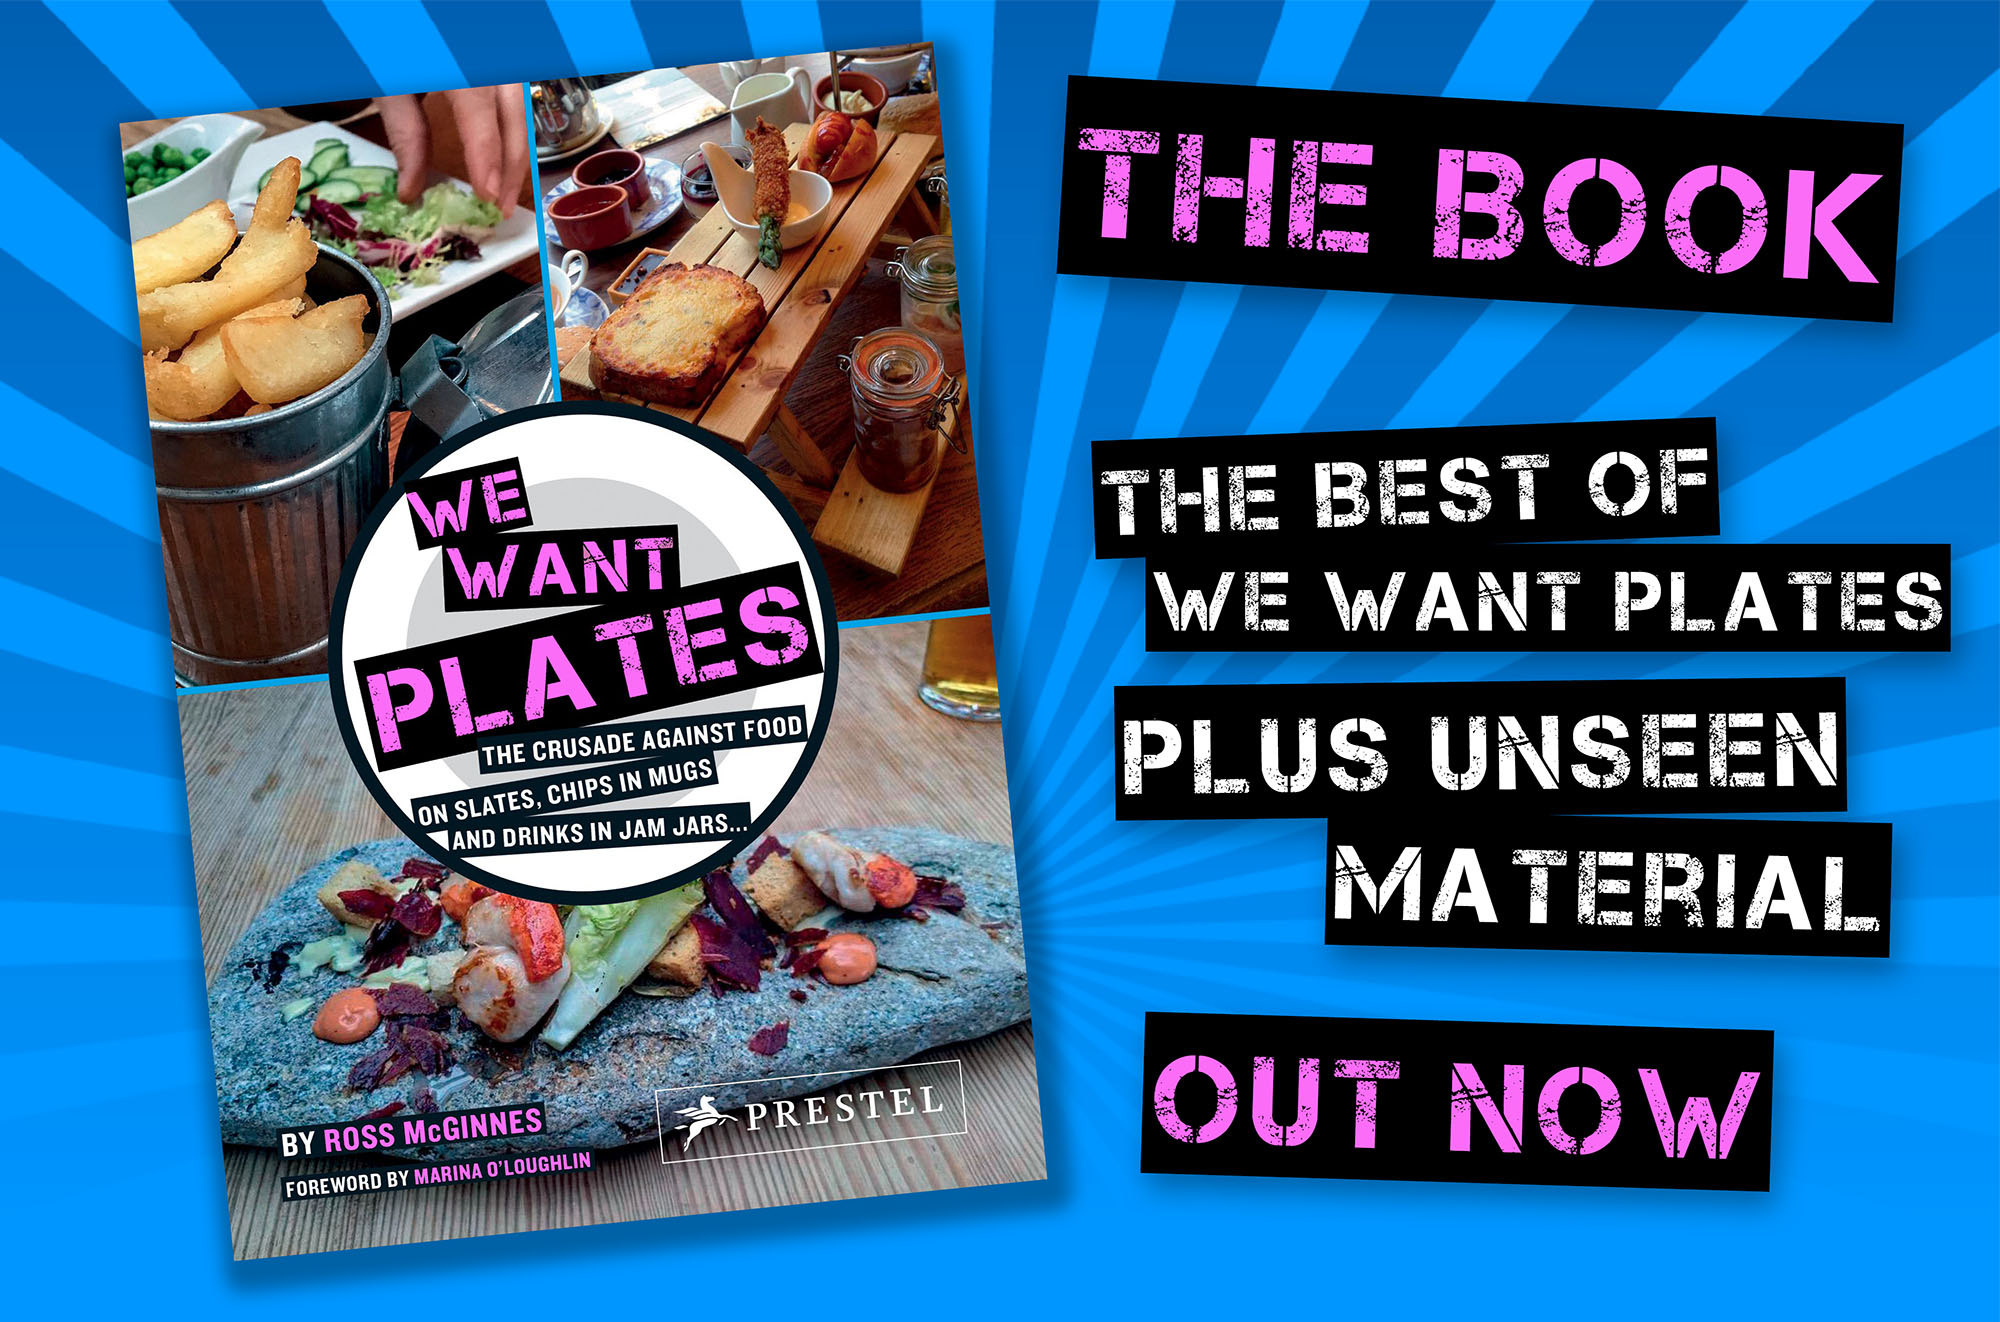 We Want Plates - The Book